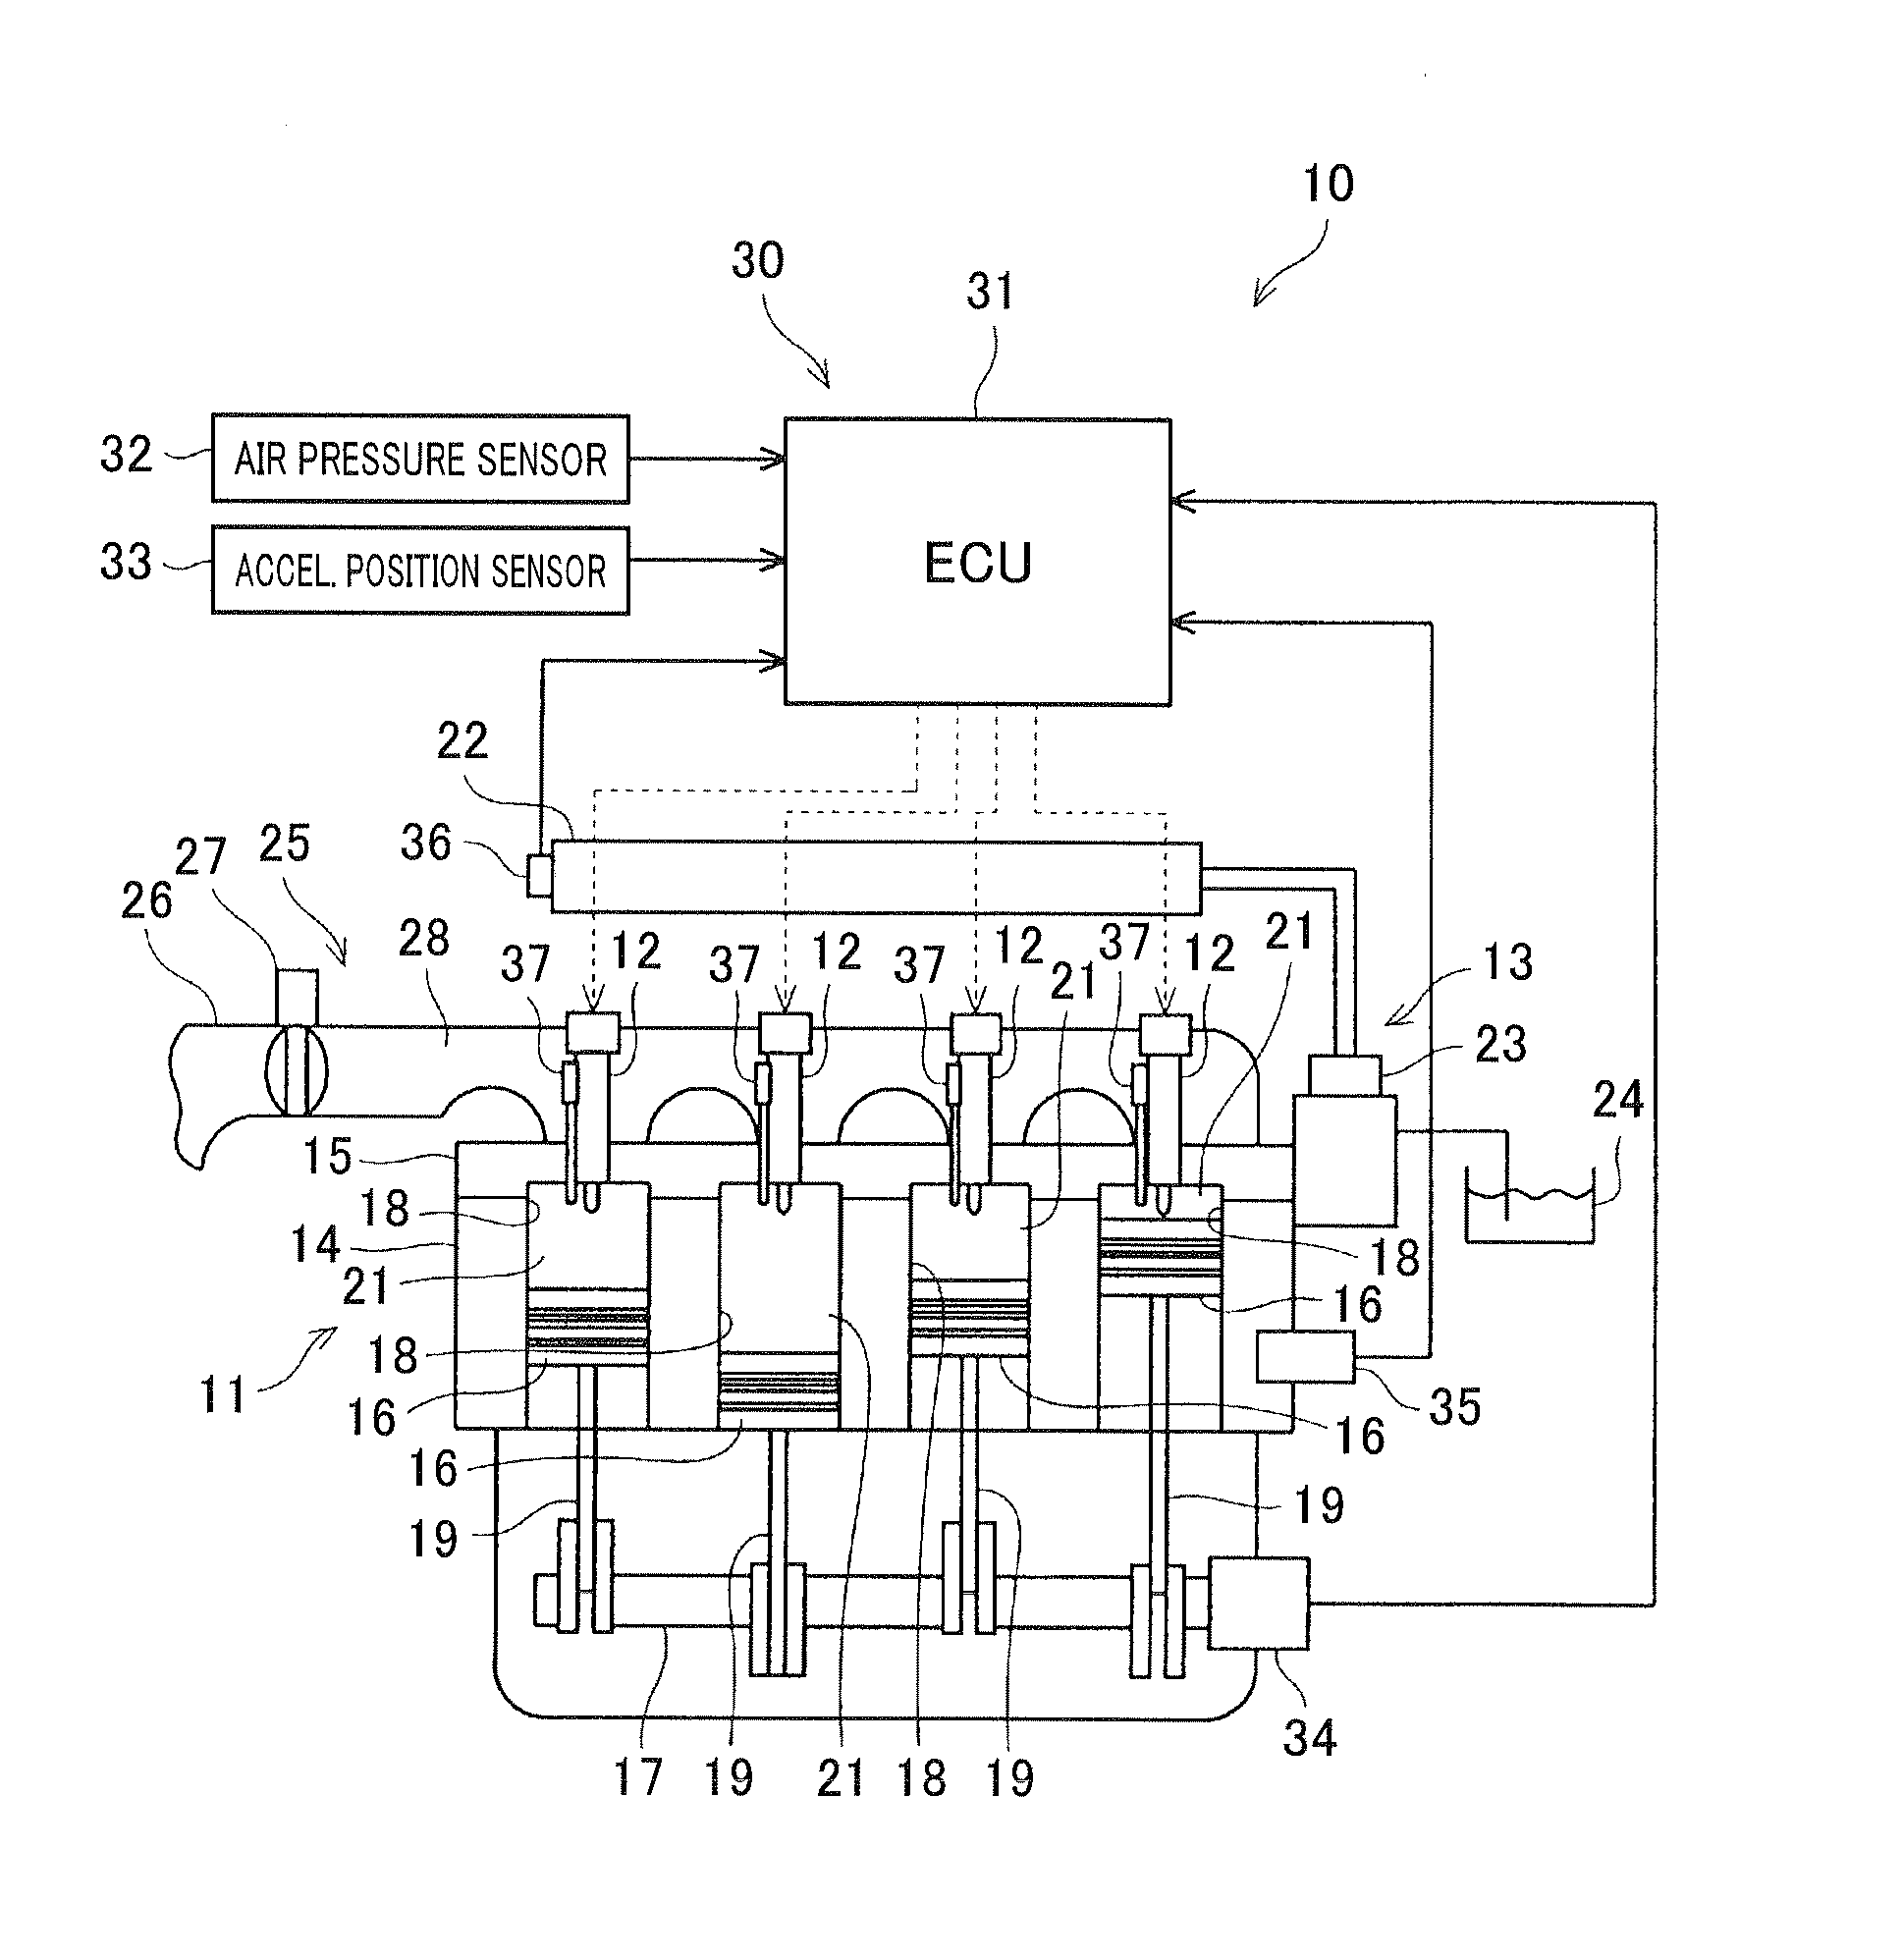 Fuel injection control system for internal combustion engine